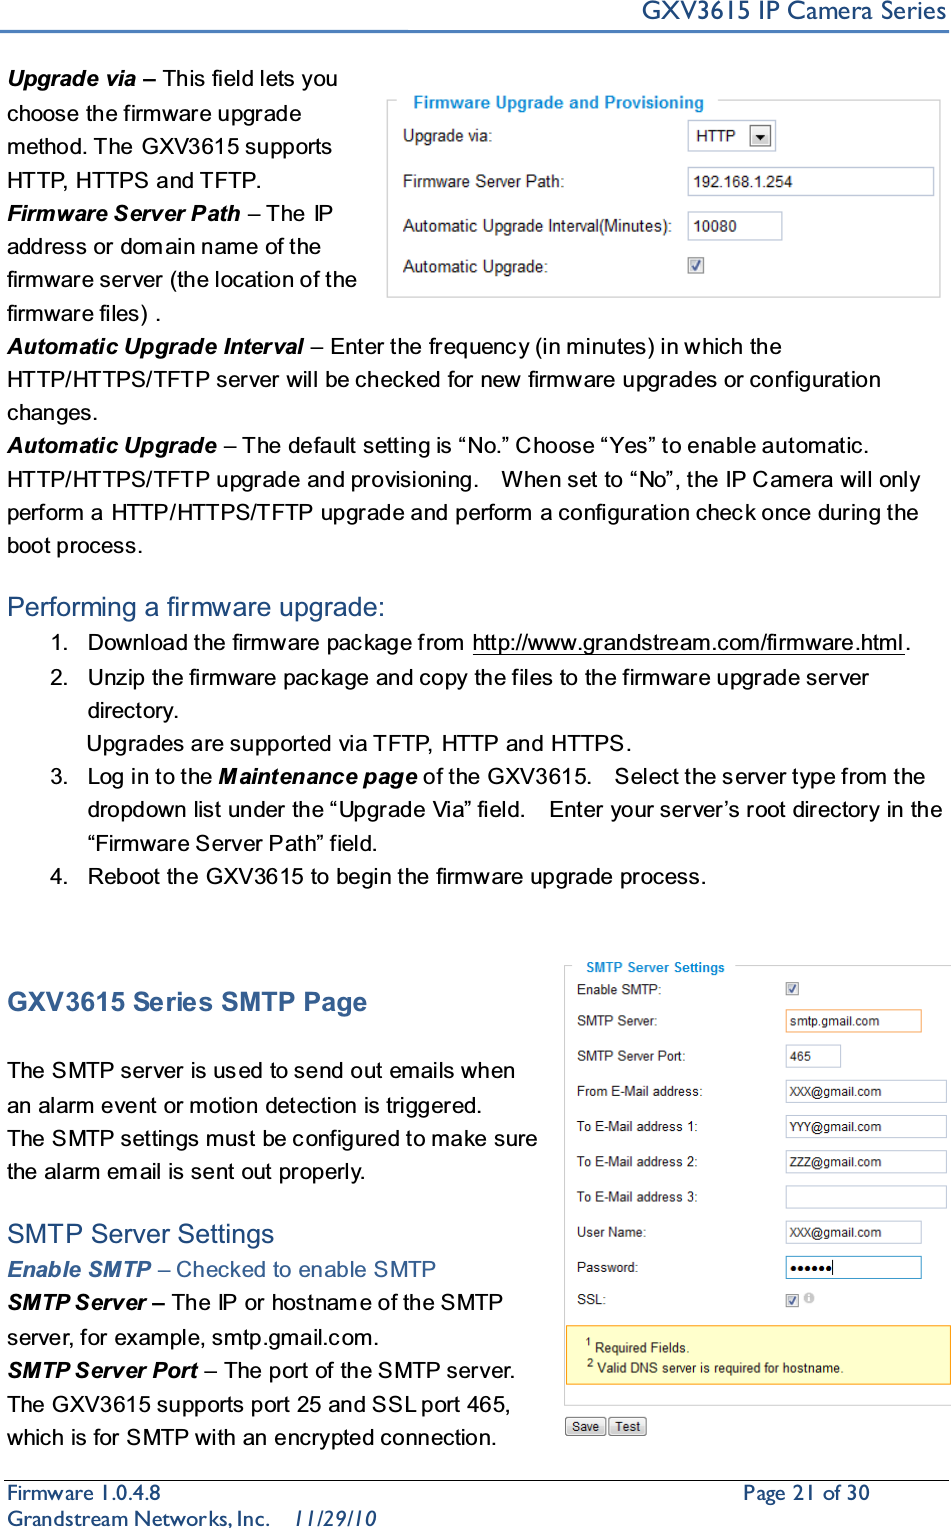 GXV3615 IP Camera SeriesFirmware 1.0.4.8                                                  Page21of 30    Grandstream Networks, Inc. 11/29/10Upgrade via ±This field lets you choose the firmware upgrade method. The GXV3615 supports HTTP, HTTPS and TFTP.Firmware Server Path ±The IP address or dom ain name of the firmware server (the location of the firmware files) .Automatic Upgrade Interval ±Enter the frequenc y (in minutes) in which the HTTP/HTTPS/TFTP server will be checked for new  firmware upgrades or configuration changes.Automatic Upgrade ± 7KHGHIDXOWVHWWLQJLV³1R´&amp; KRRVH³&lt;HV´WRHQDEOHDXtomatic.  +773+77367)73XSJUDGHDQGSURYLVLRQLQJ  :KHQVHWWR³1R´WKH,3&amp; DPHUDZLOORQO\perform a HTTP/HTTPS/TFTP upgrade and perform a configuration chec k once during the boot process.Performing a firmware upgrade:1. Download the firmware package from http://www.grandstream.com/firmware.html.2. Unzip the firmware pac kage and copy the files to the firmware upgrade server directory.               Upgrades are supported via TFTP, HTTP and HTTPS.3. Log in to the M aintenance page of the GXV3615.    Select the s erver type from the GURSGRZQOLVWXQGHUWKH³8SJUDGH9LD´ILHOG  (QWHU\RXUVHUYHU¶VURRWGLUHFWRU\LQWKH³)LUPZDUH6HUYHU3DWK´ILHOG4. Reboot the GXV3615 to begin the firmware upgrade process.GXV3615 Series SMTP PageThe SMTP server is used to send out emails when an alarm event or motion detection is triggered.   The SMTP settings must be c onfigured to make sure the alarm em ail is sent out properly.SMTP Server SettingsEnable SMTP ±Checked to enable SMTPSMTP Server ±The IP or hostnam e of the SMTP server, for example, smtp.gmail.c om.SMTP Server Port ±The port of the SMTP server. The GXV3615 supports port 25 and SSL port 465, which is for SMTP with an encrypted connection.